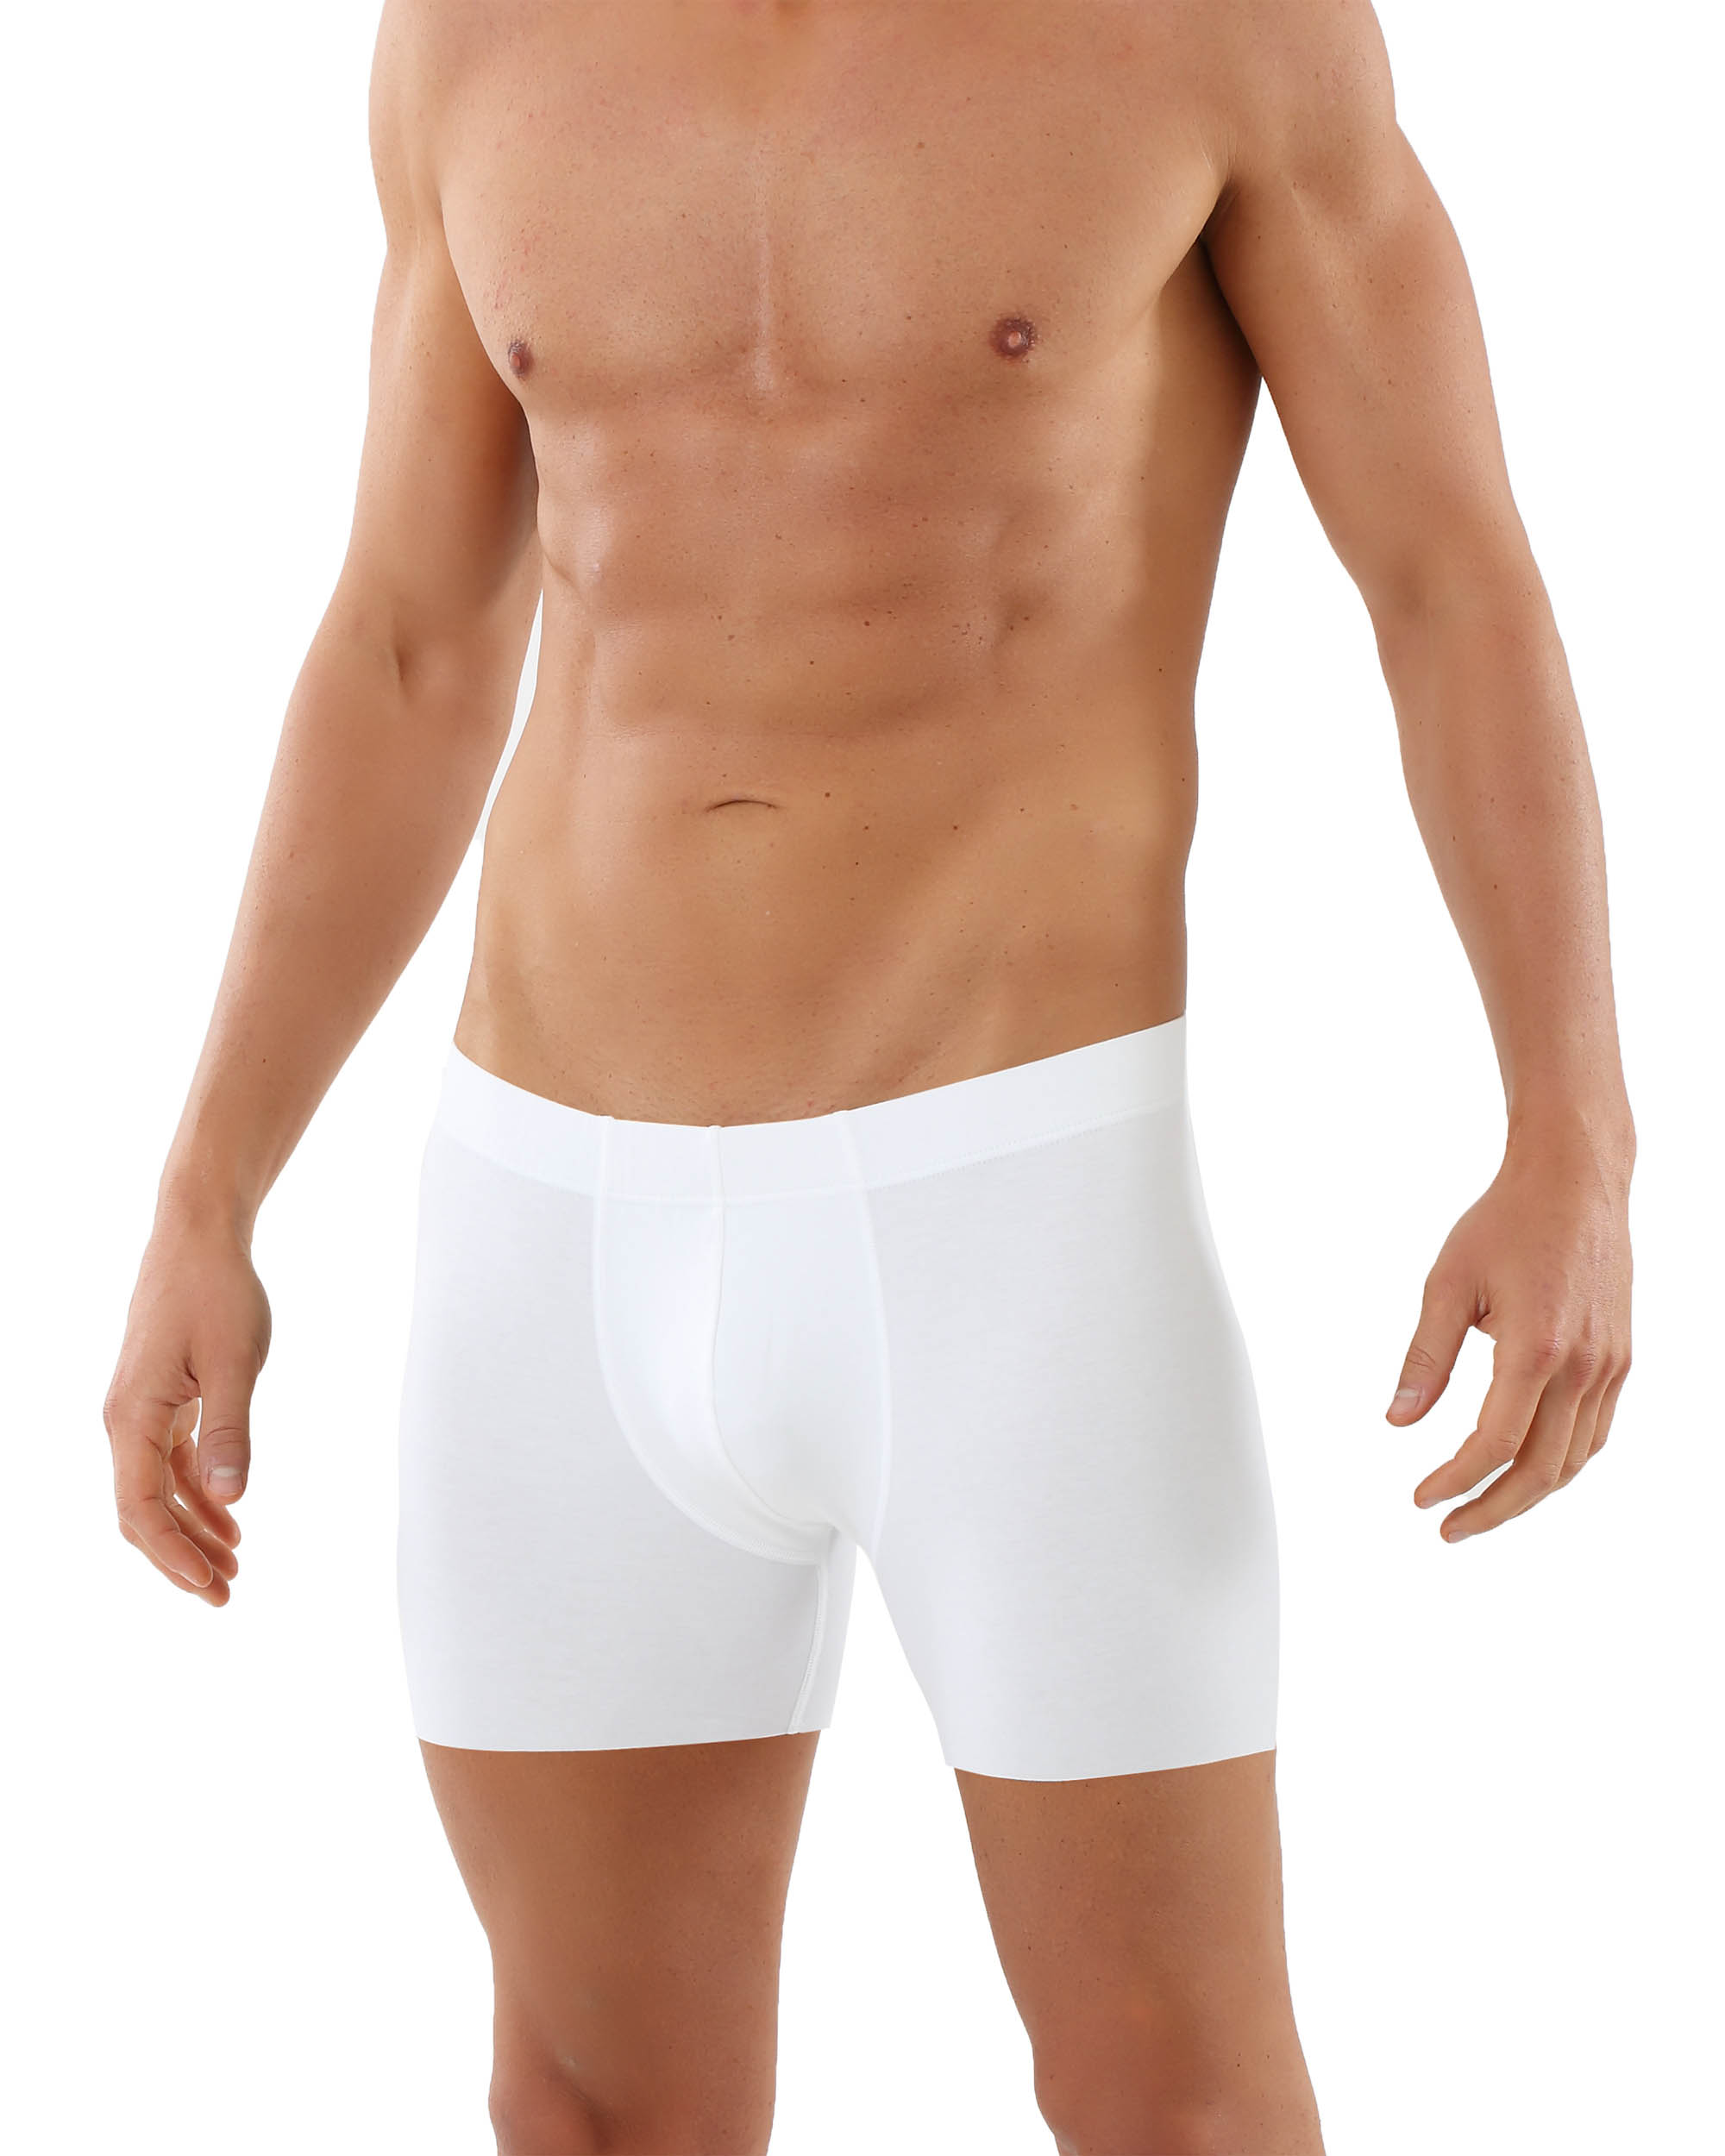 What Are Briefs, According To An Underwear Expert